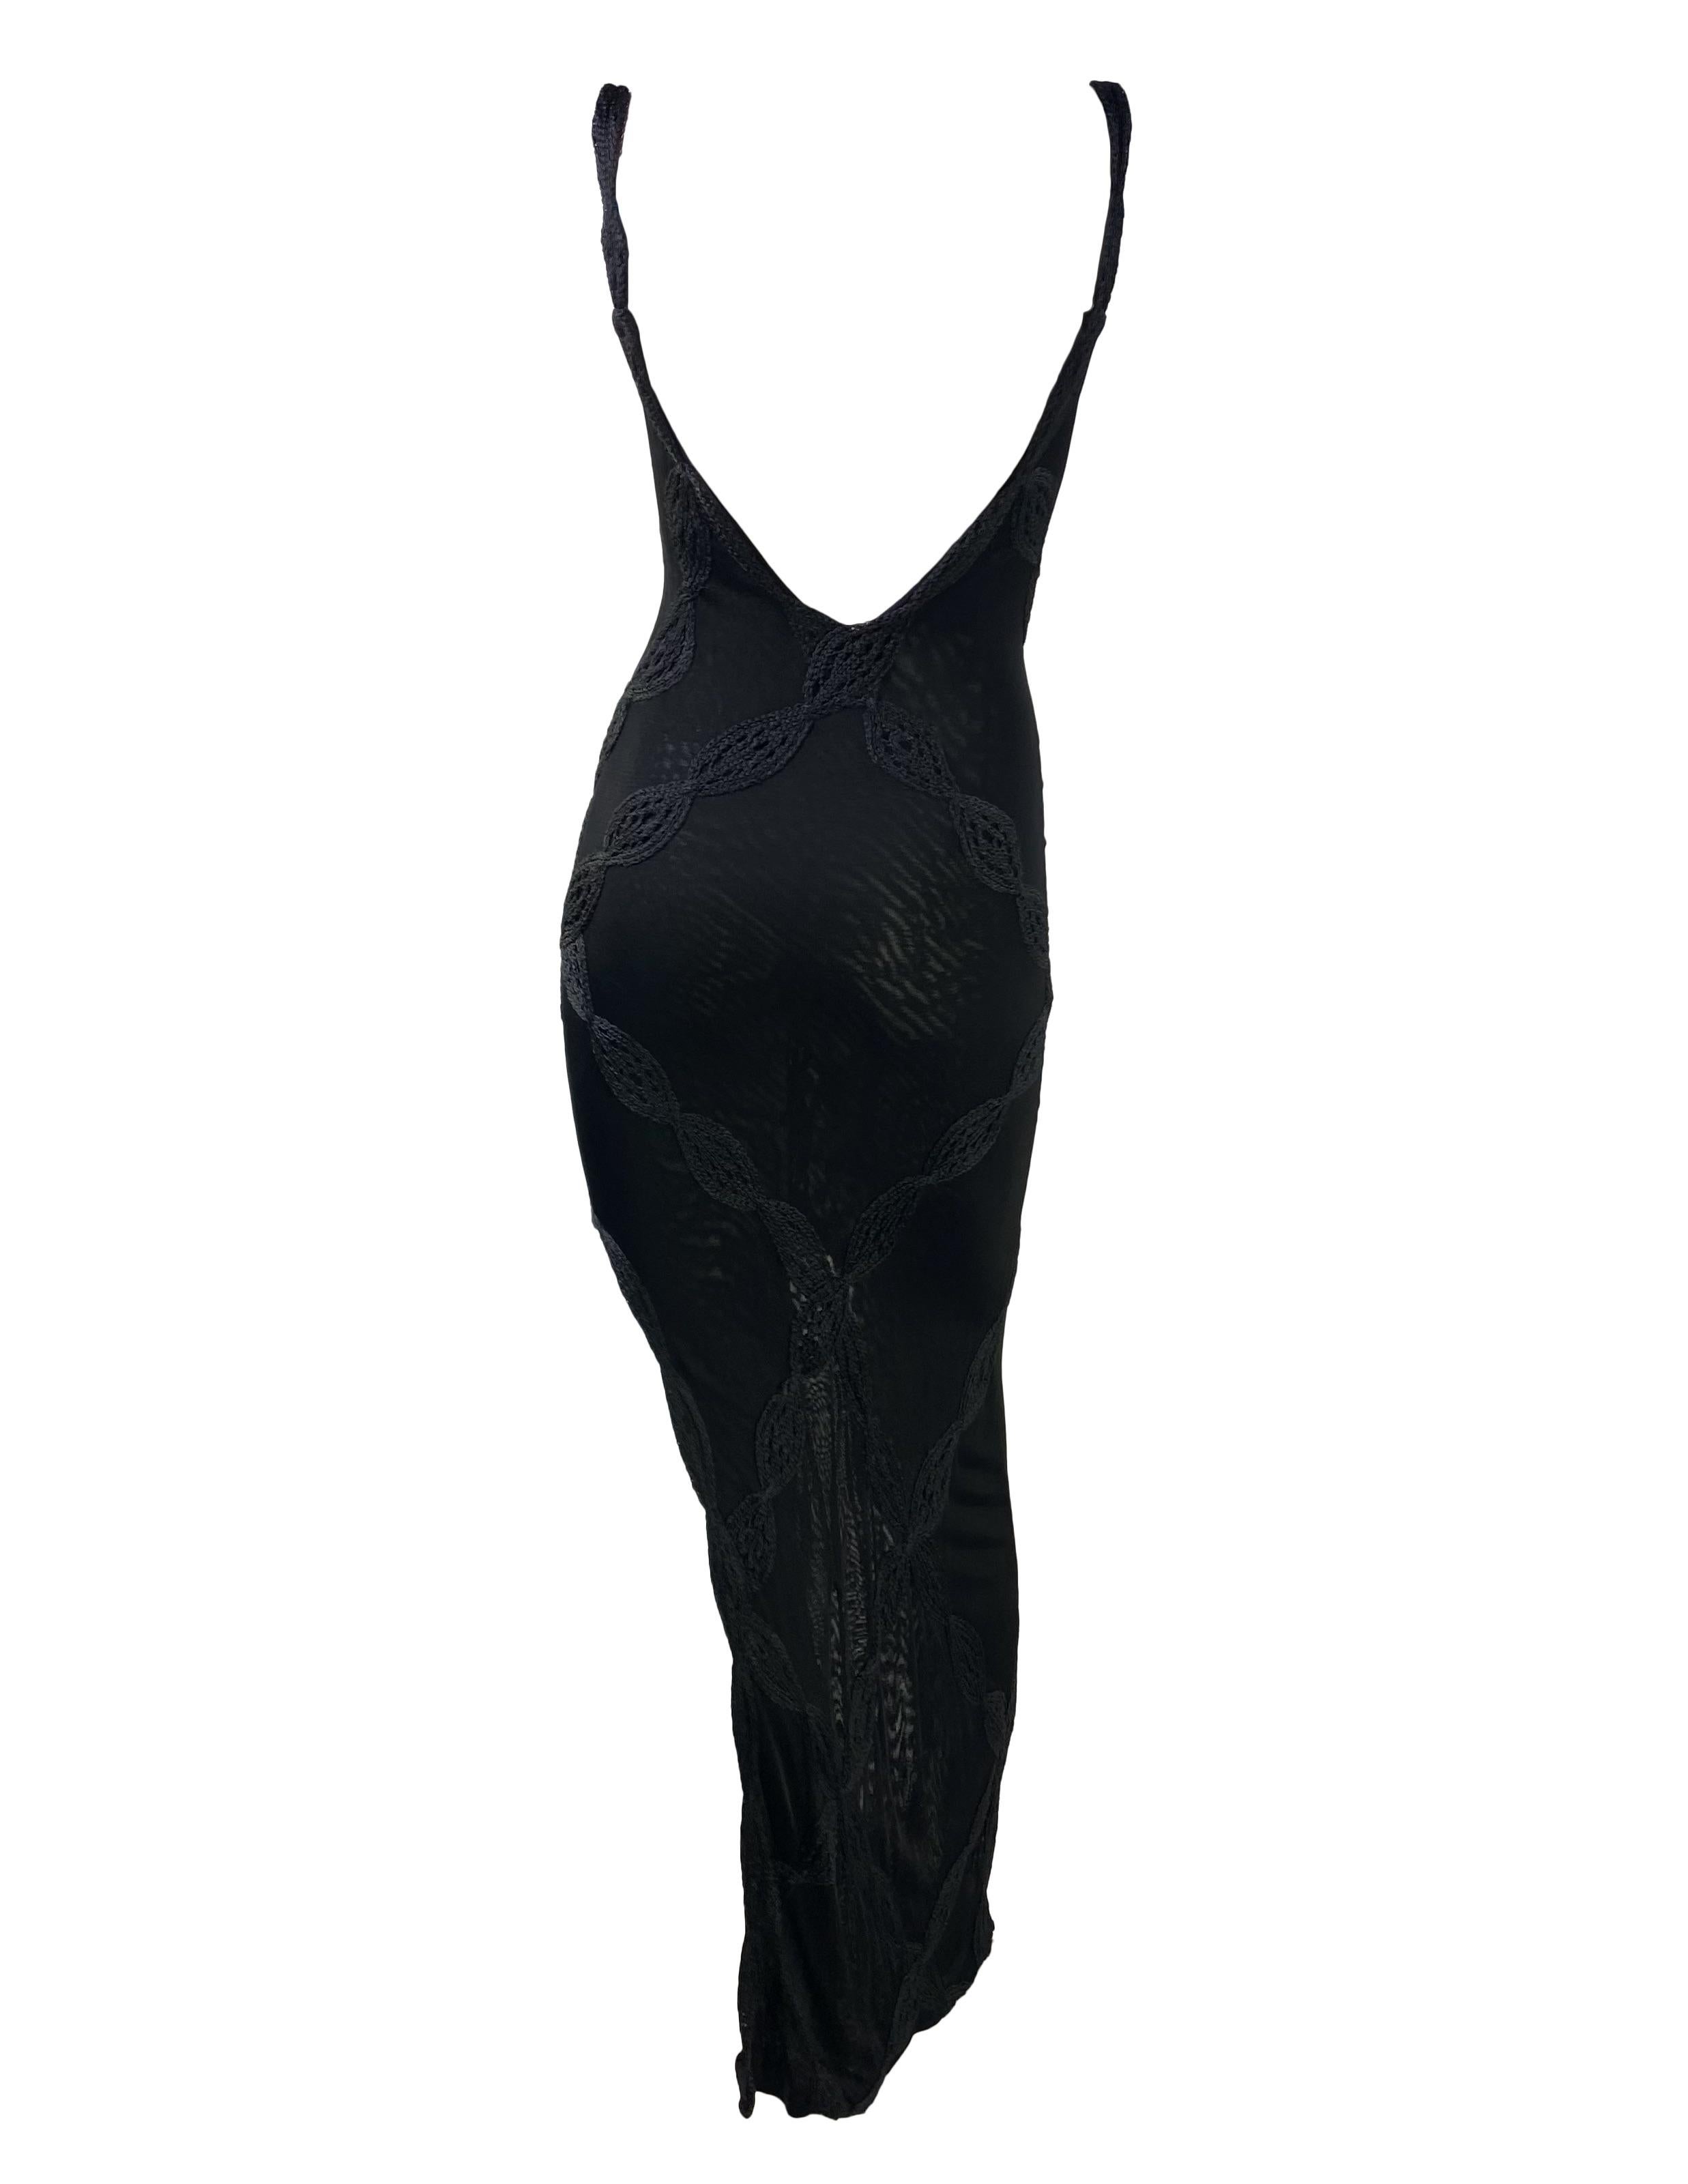 S/S 2001 Christian Dior by John Galliano Black Knit Crochet Dress In Good Condition For Sale In West Hollywood, CA